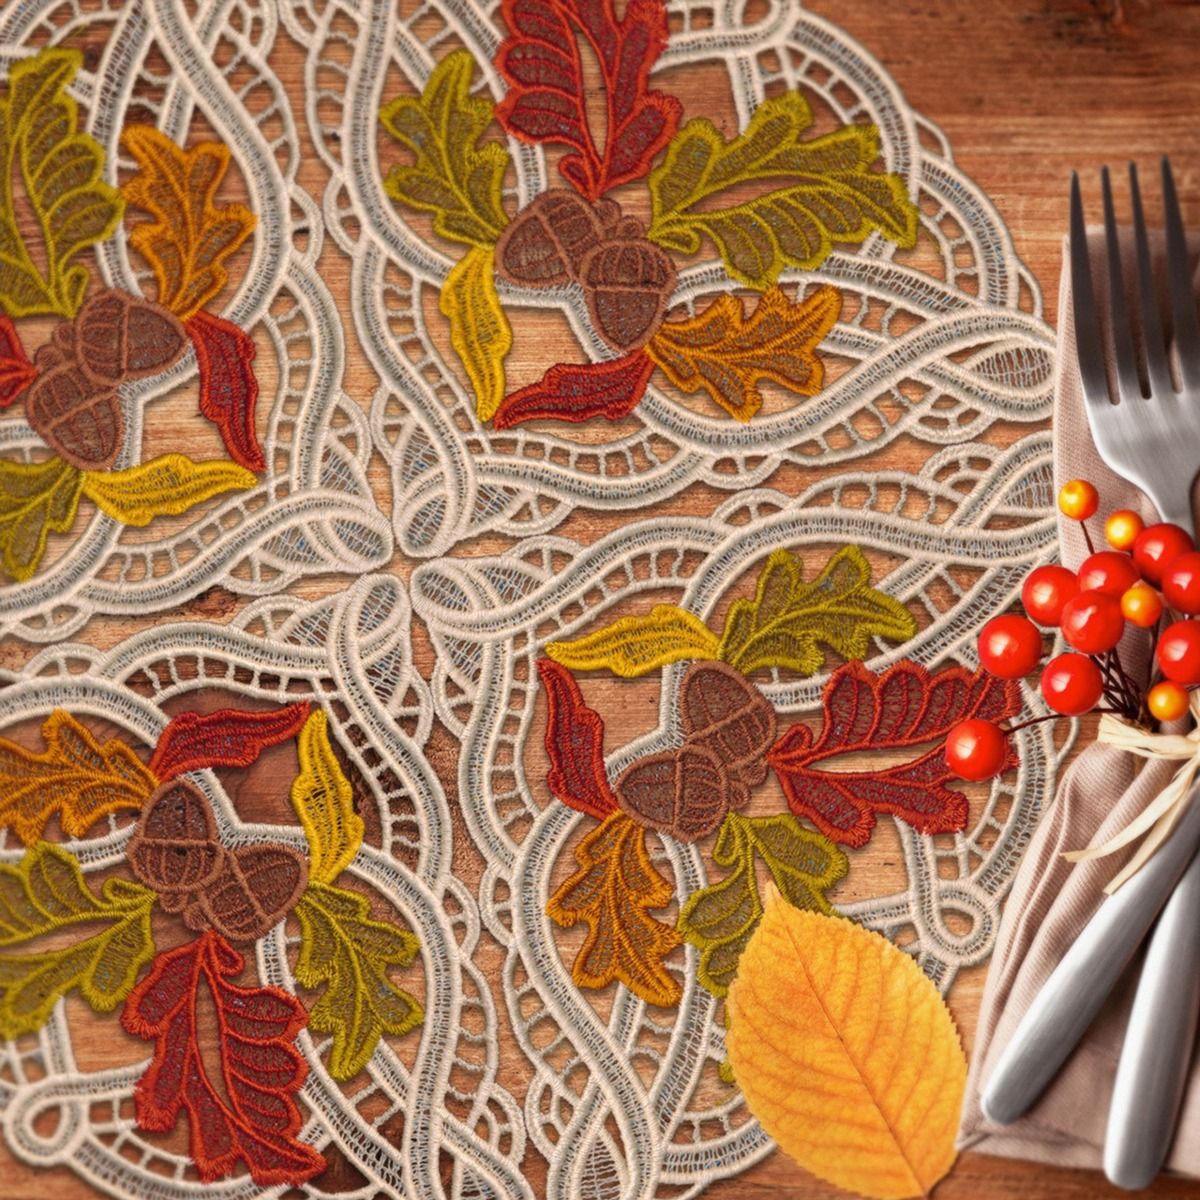 Disk OESD Buildable Doilies Autumn,Disk OESD Buildable Doilies Autumn,Disk OESD Buildable Doilies Autumn,Disk OESD Buildable Doilies Autumn